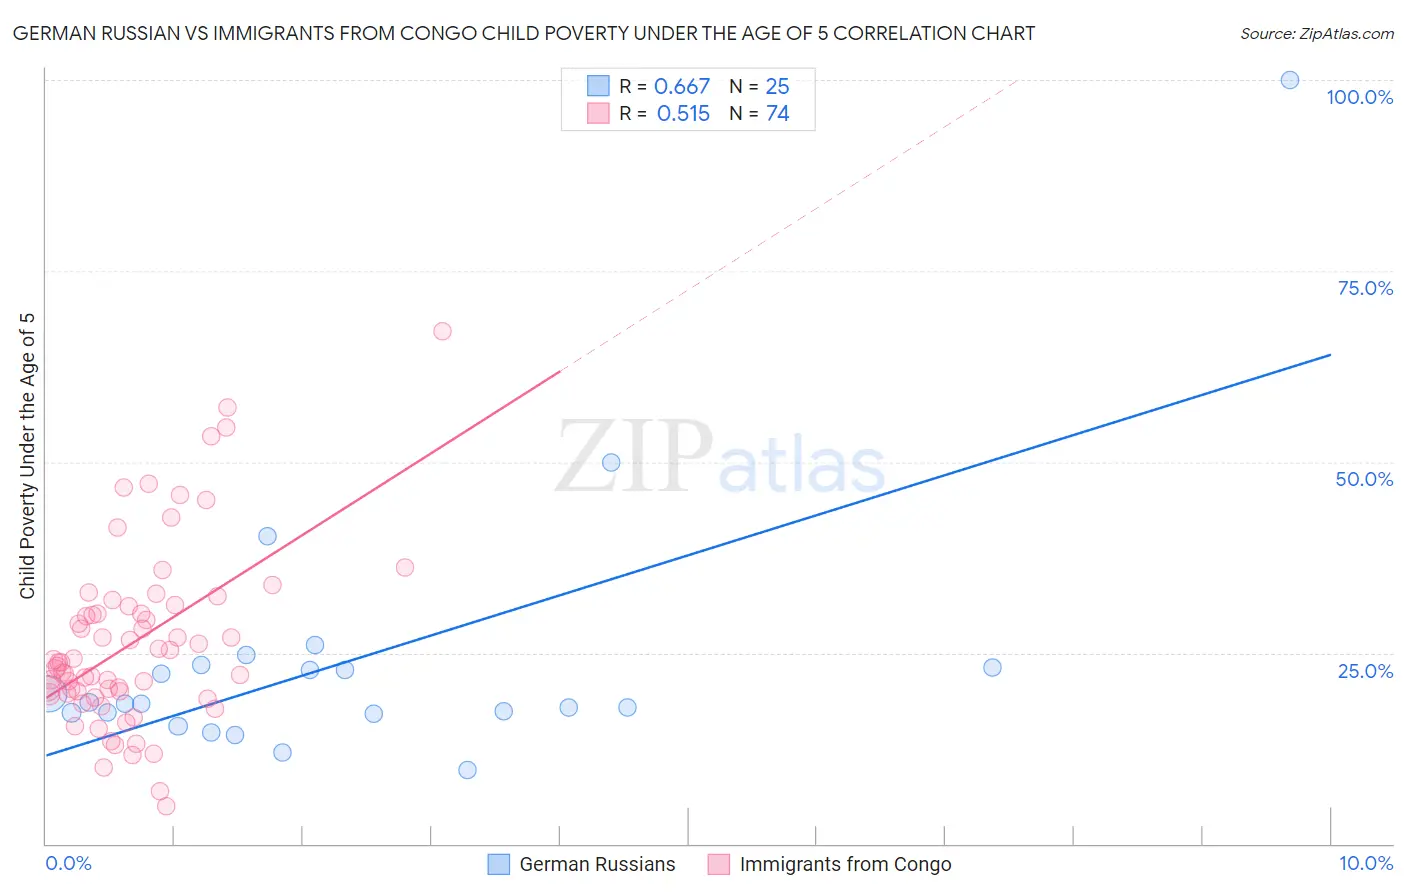 German Russian vs Immigrants from Congo Child Poverty Under the Age of 5